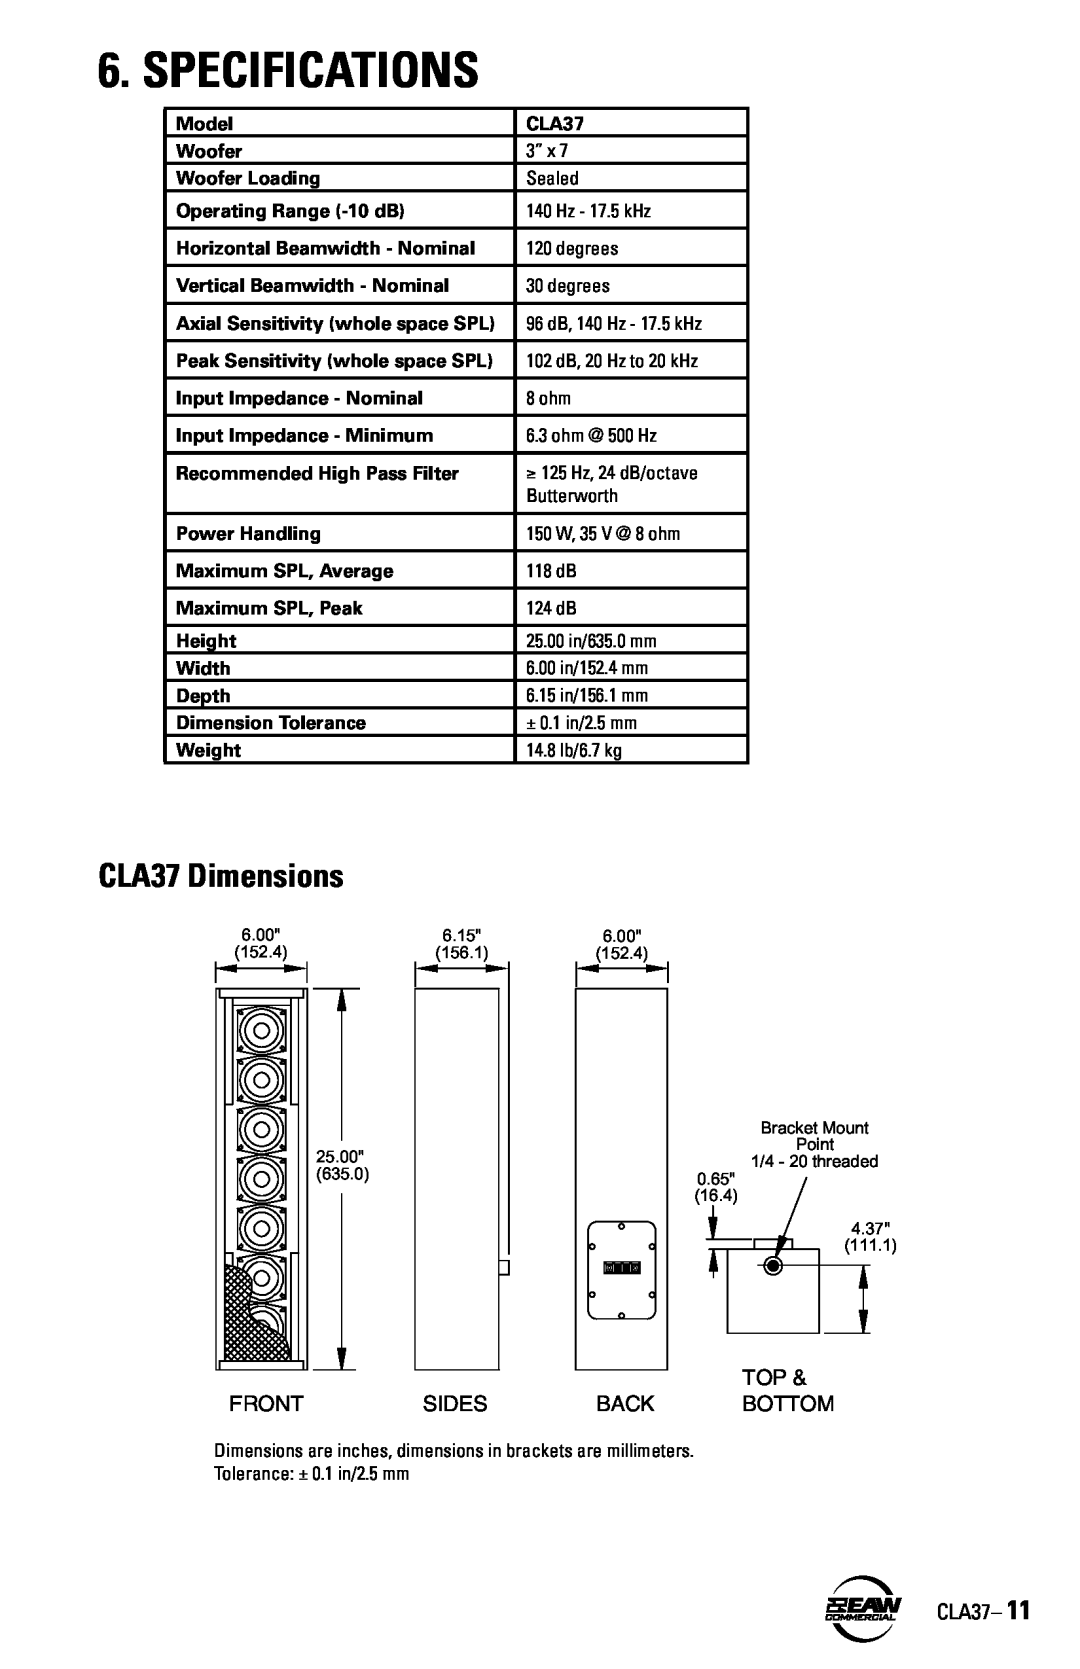 EAW instruction manual Specifications, CLA37 Dimensions, Top, Front, Sides, Back, Bottom 